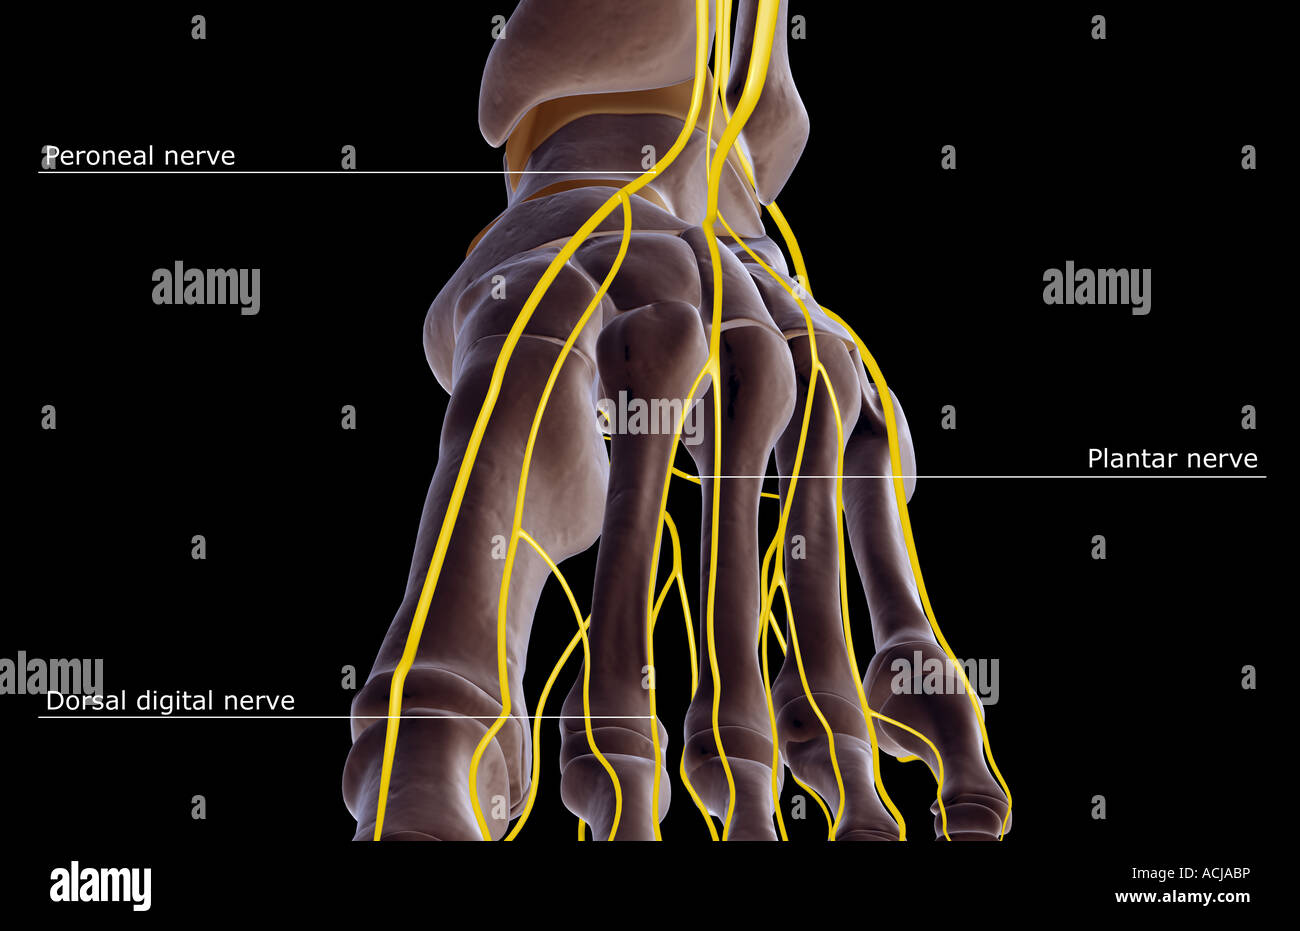 Dorsal Digital Nerves High Resolution Stock Photography and Images - Alamy